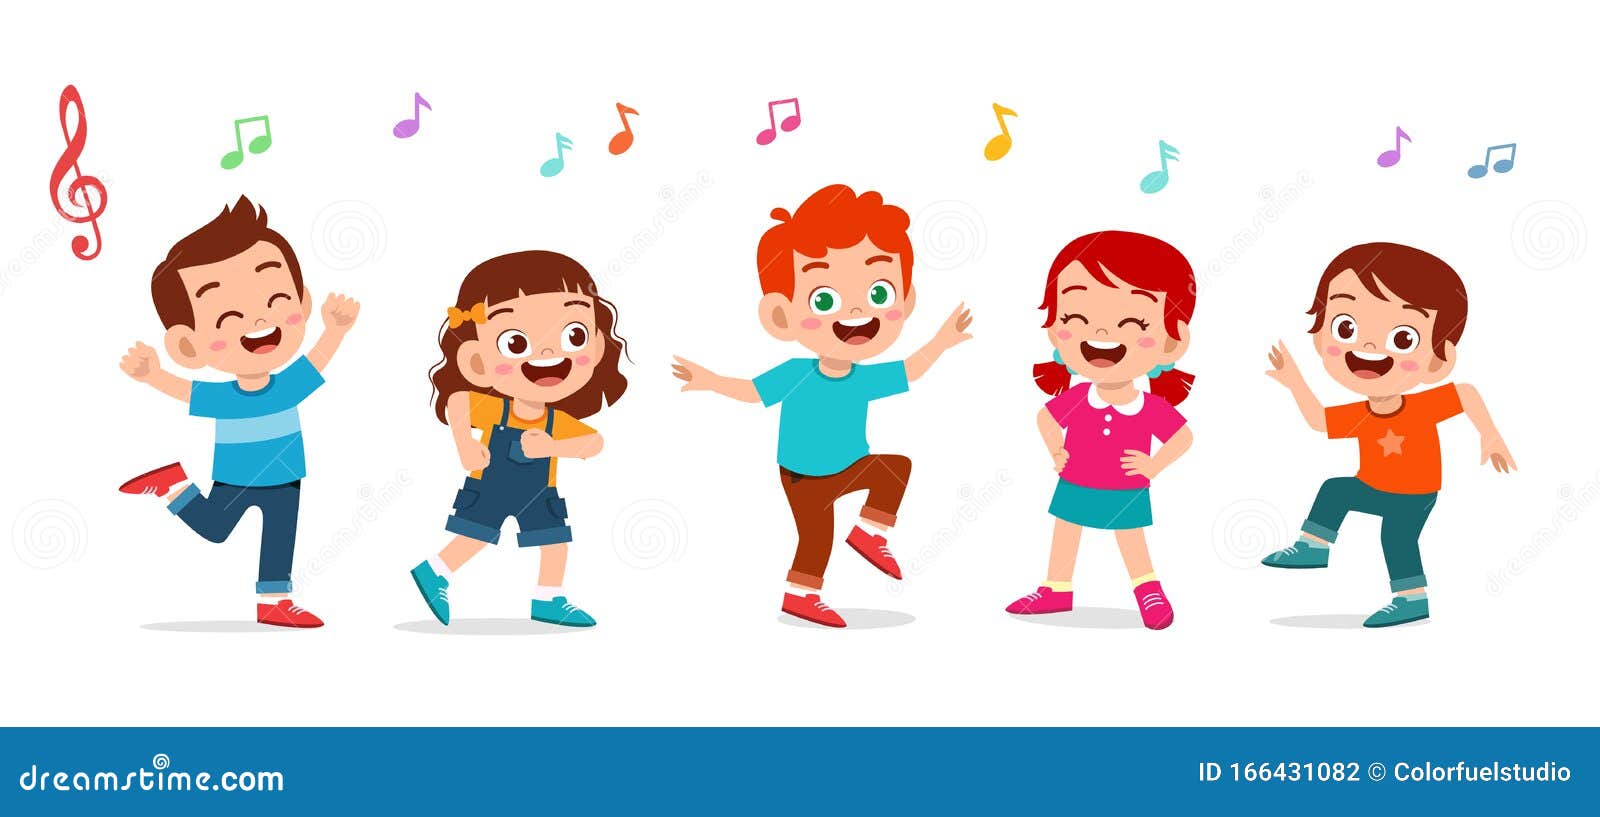 Dance Cartoons, Illustrations & Vector Stock Images - 199908 Pictures ... Watercolor People Dancing